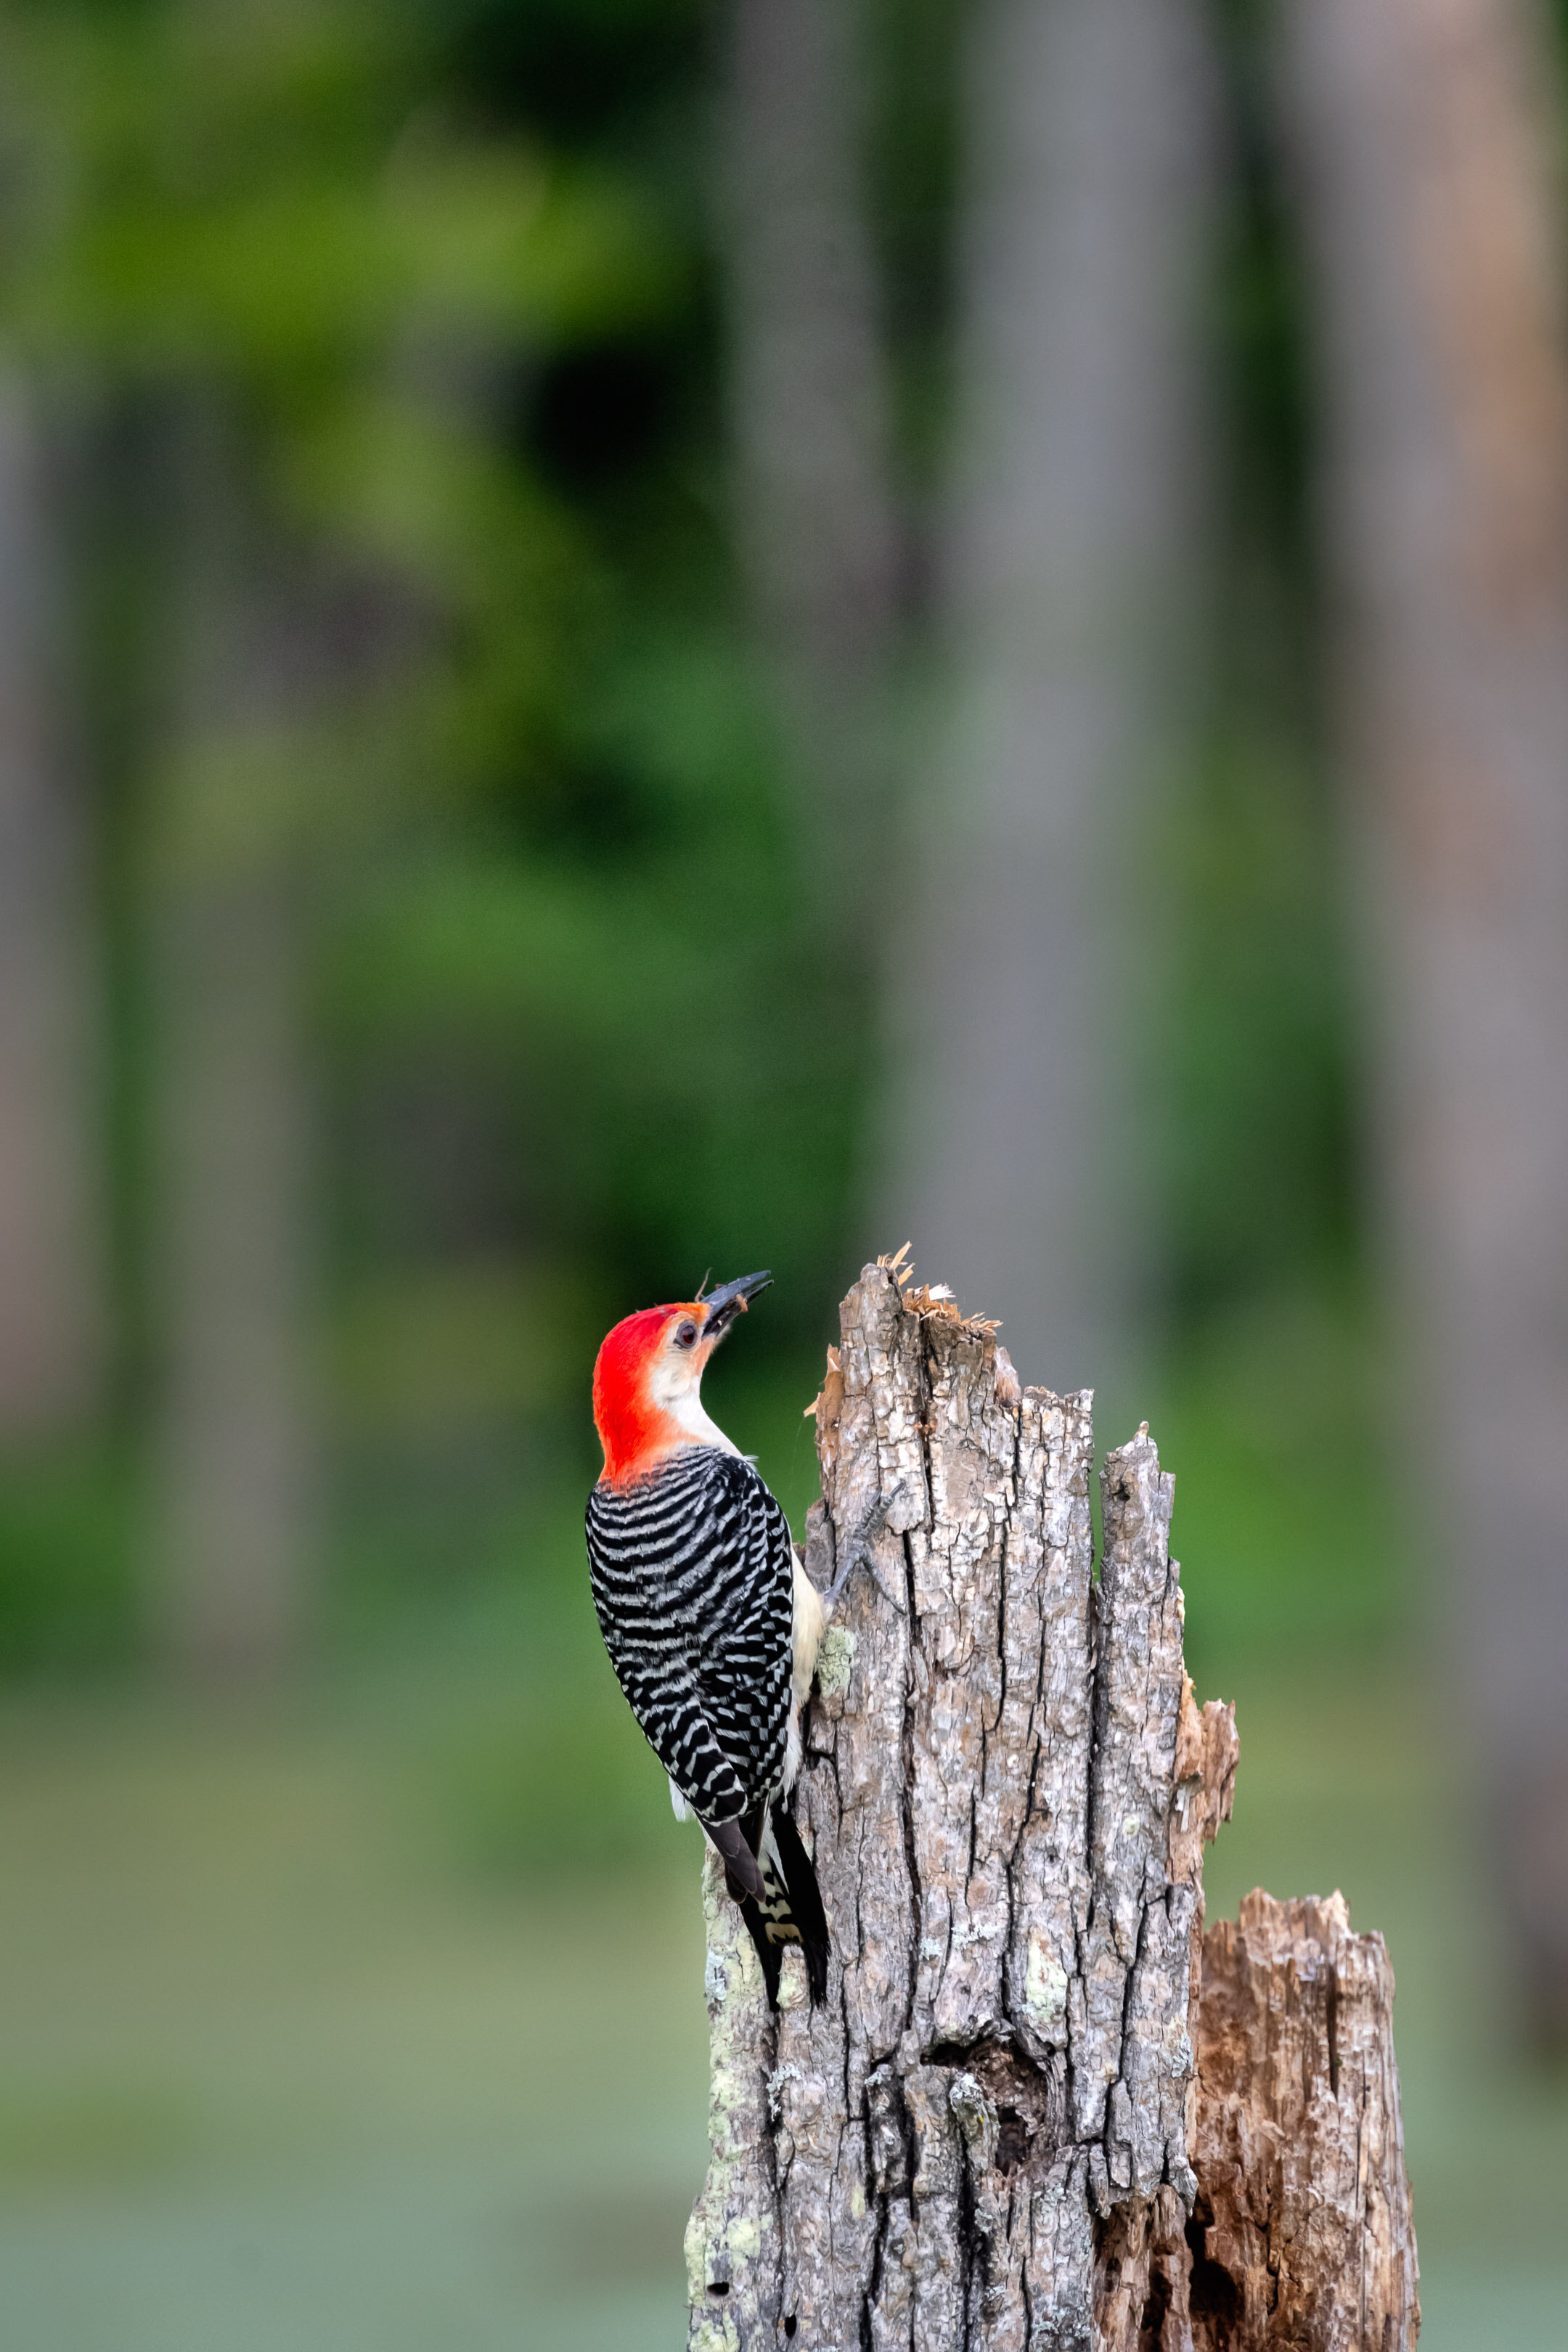 Red Bellied Woodpecker Eating a Grub